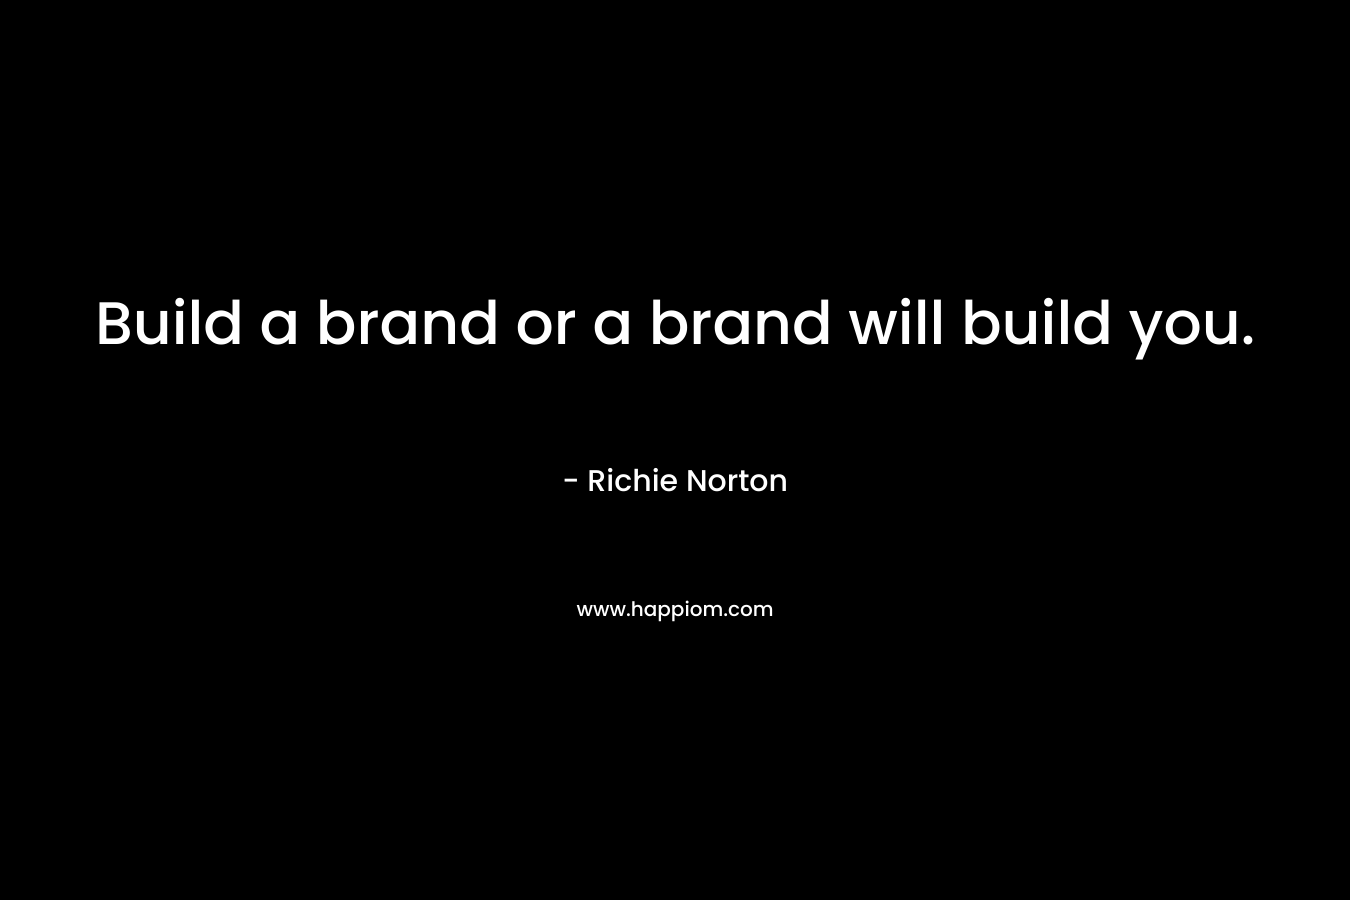 Build a brand or a brand will build you.